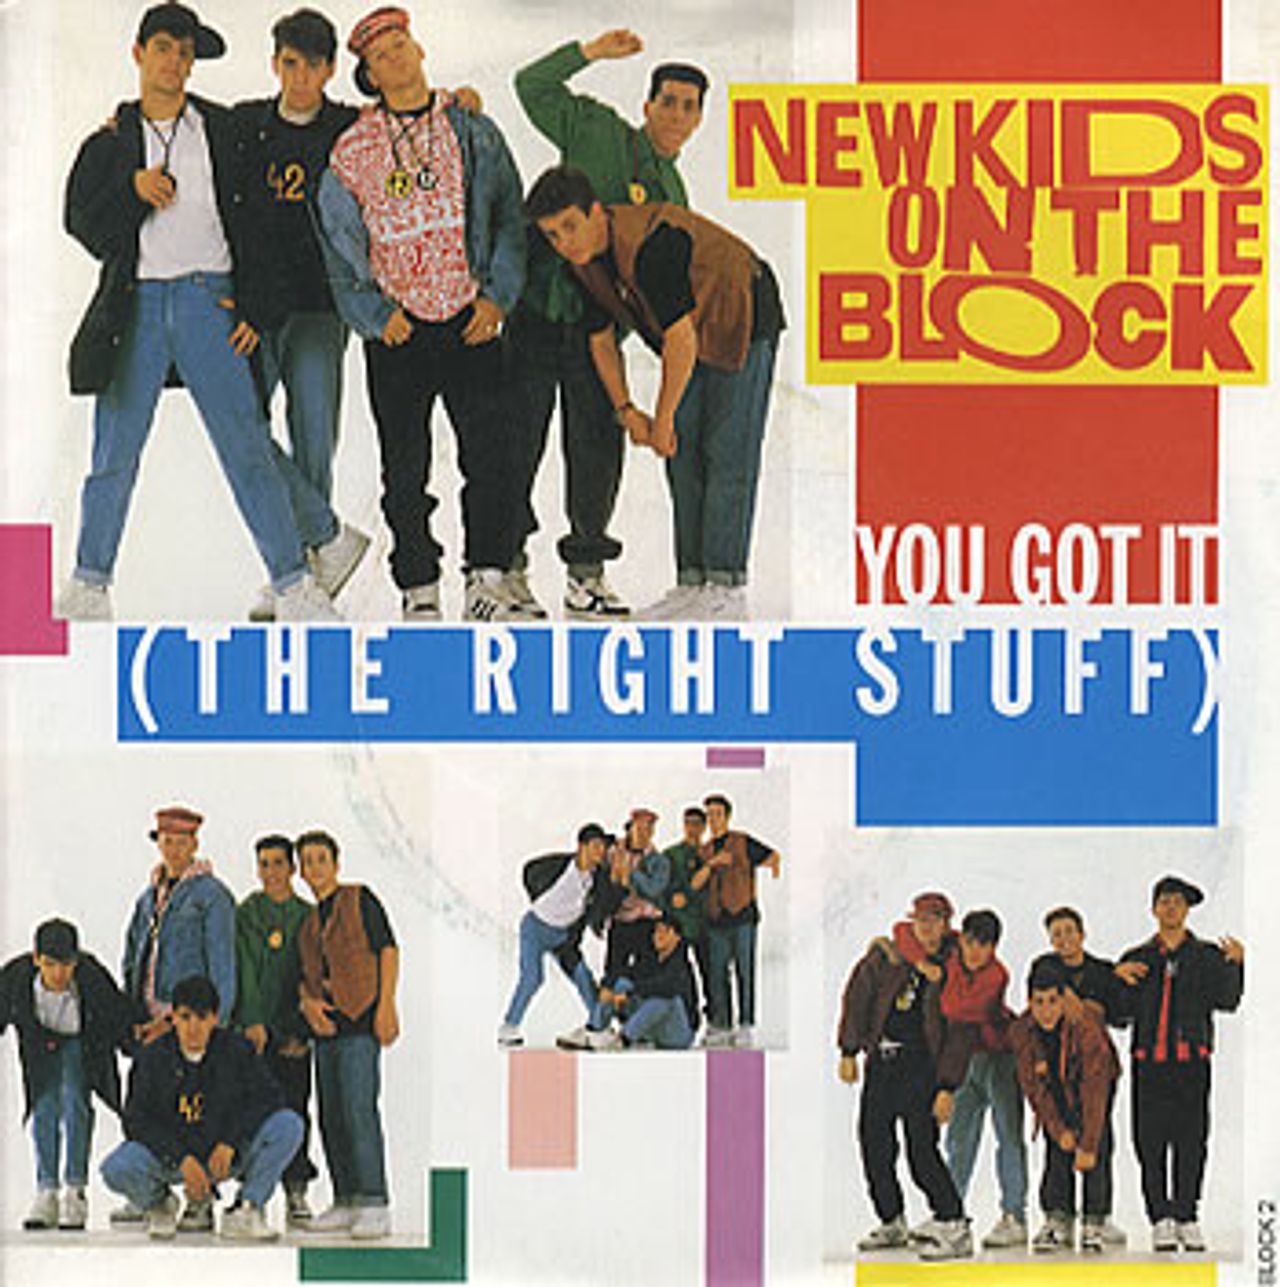 New Kids On The Block You Got It (The Right Stuff) UK 7